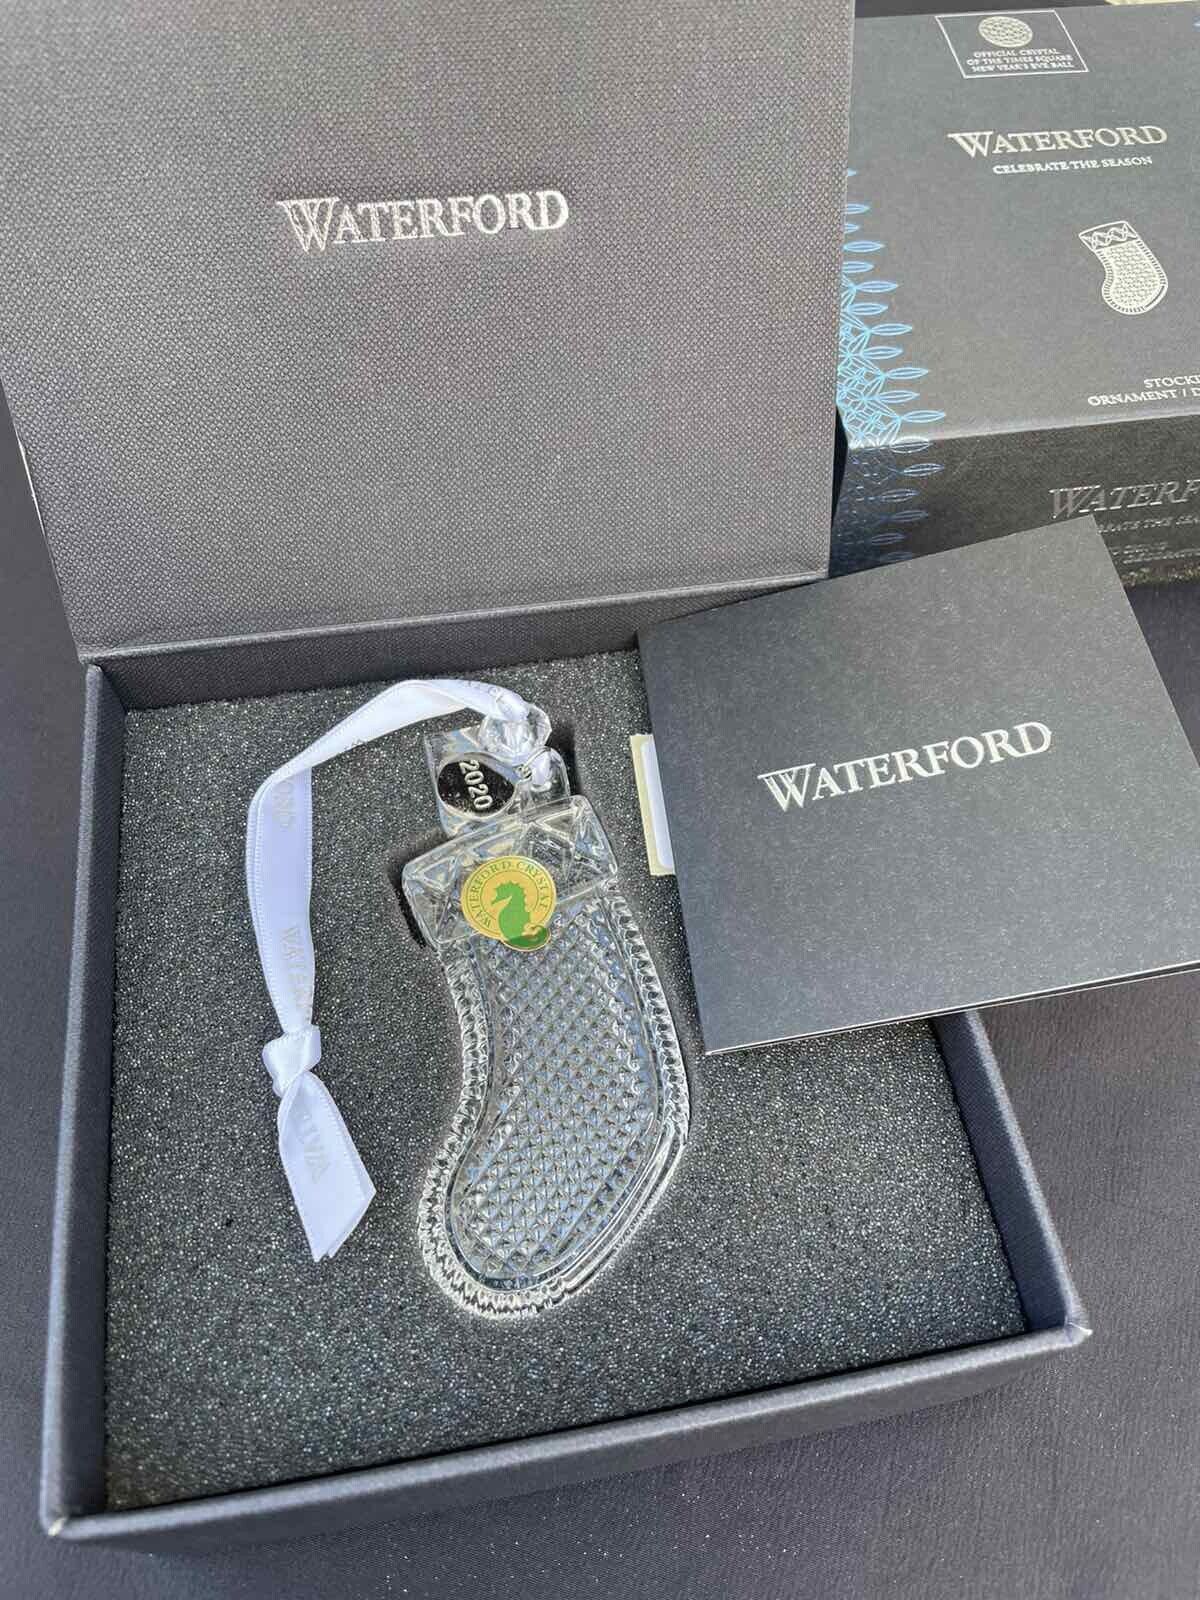 New In Box Waterford 2020 Crystal Clear Christmas Stocking Ornament #1055087